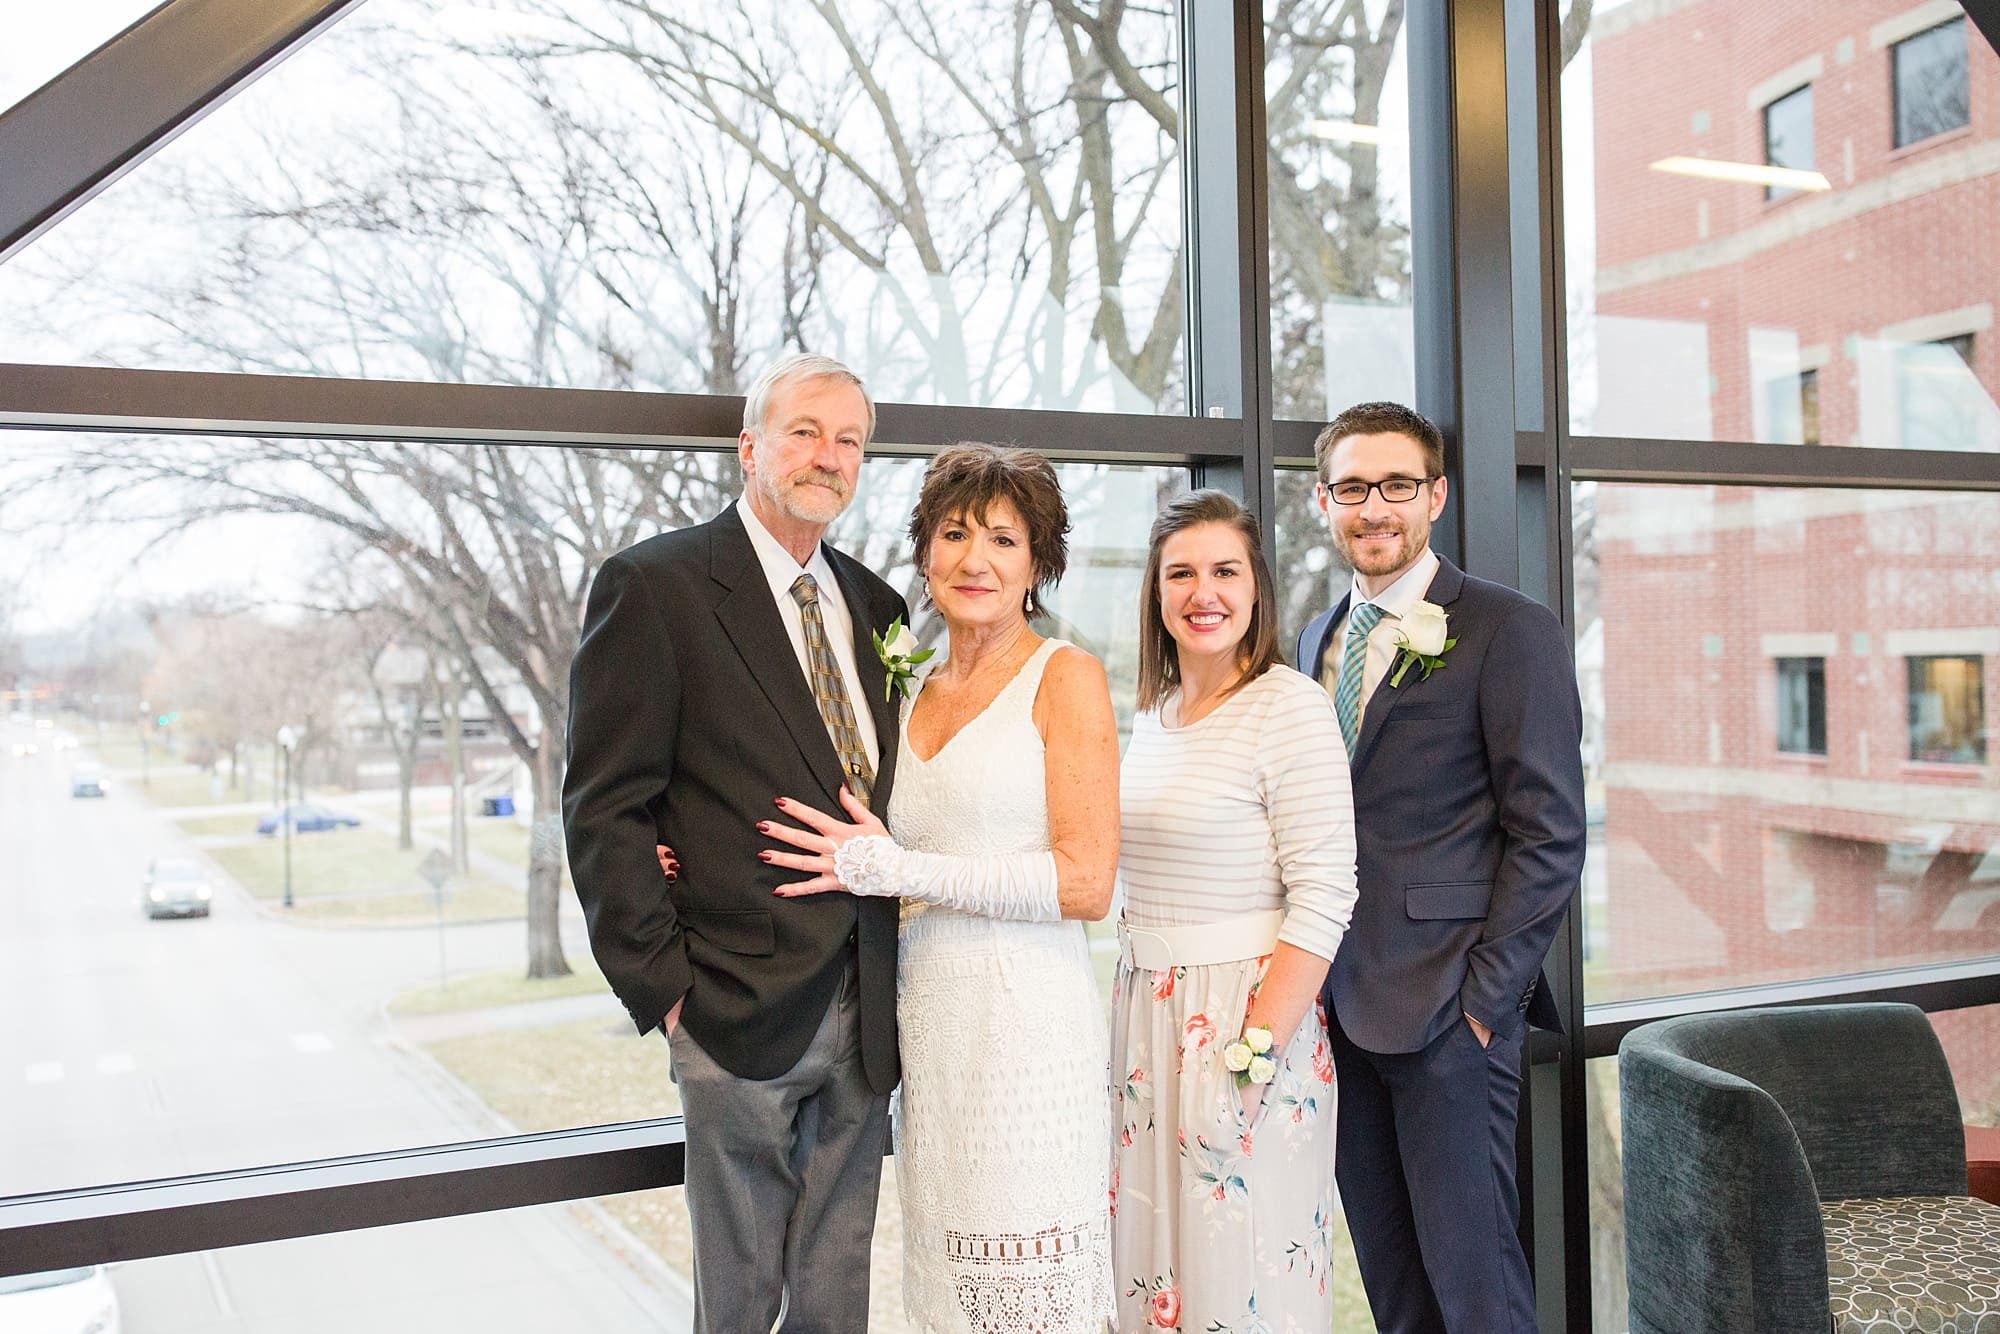 Bridal Party Photos before a Cass County Courthouse Wedding